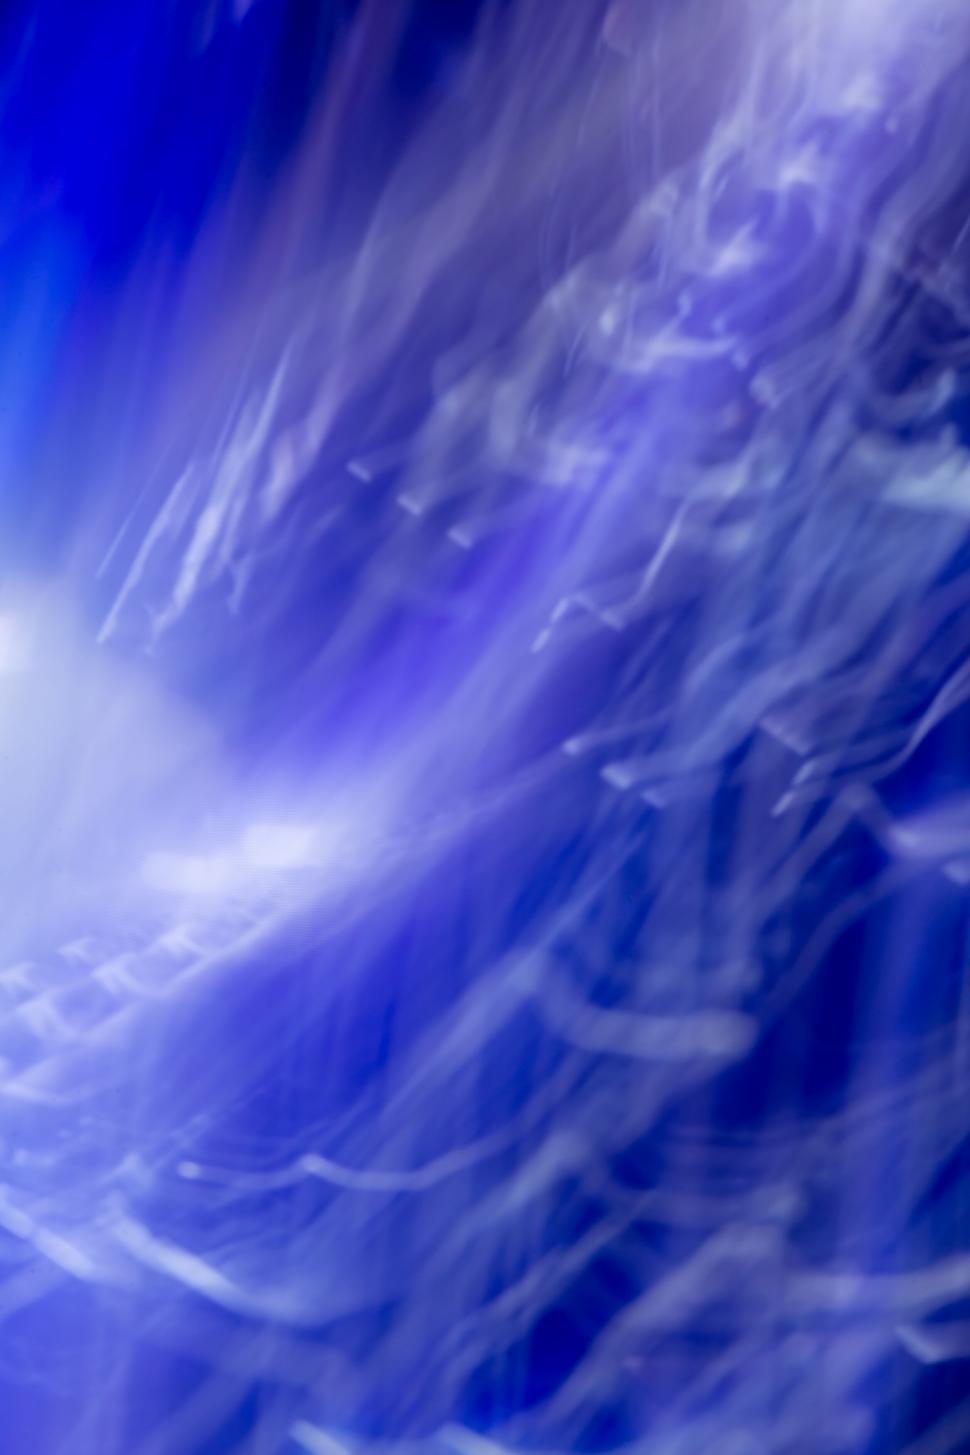 Free Image of Ethereal blue webbed pattern motion blur 